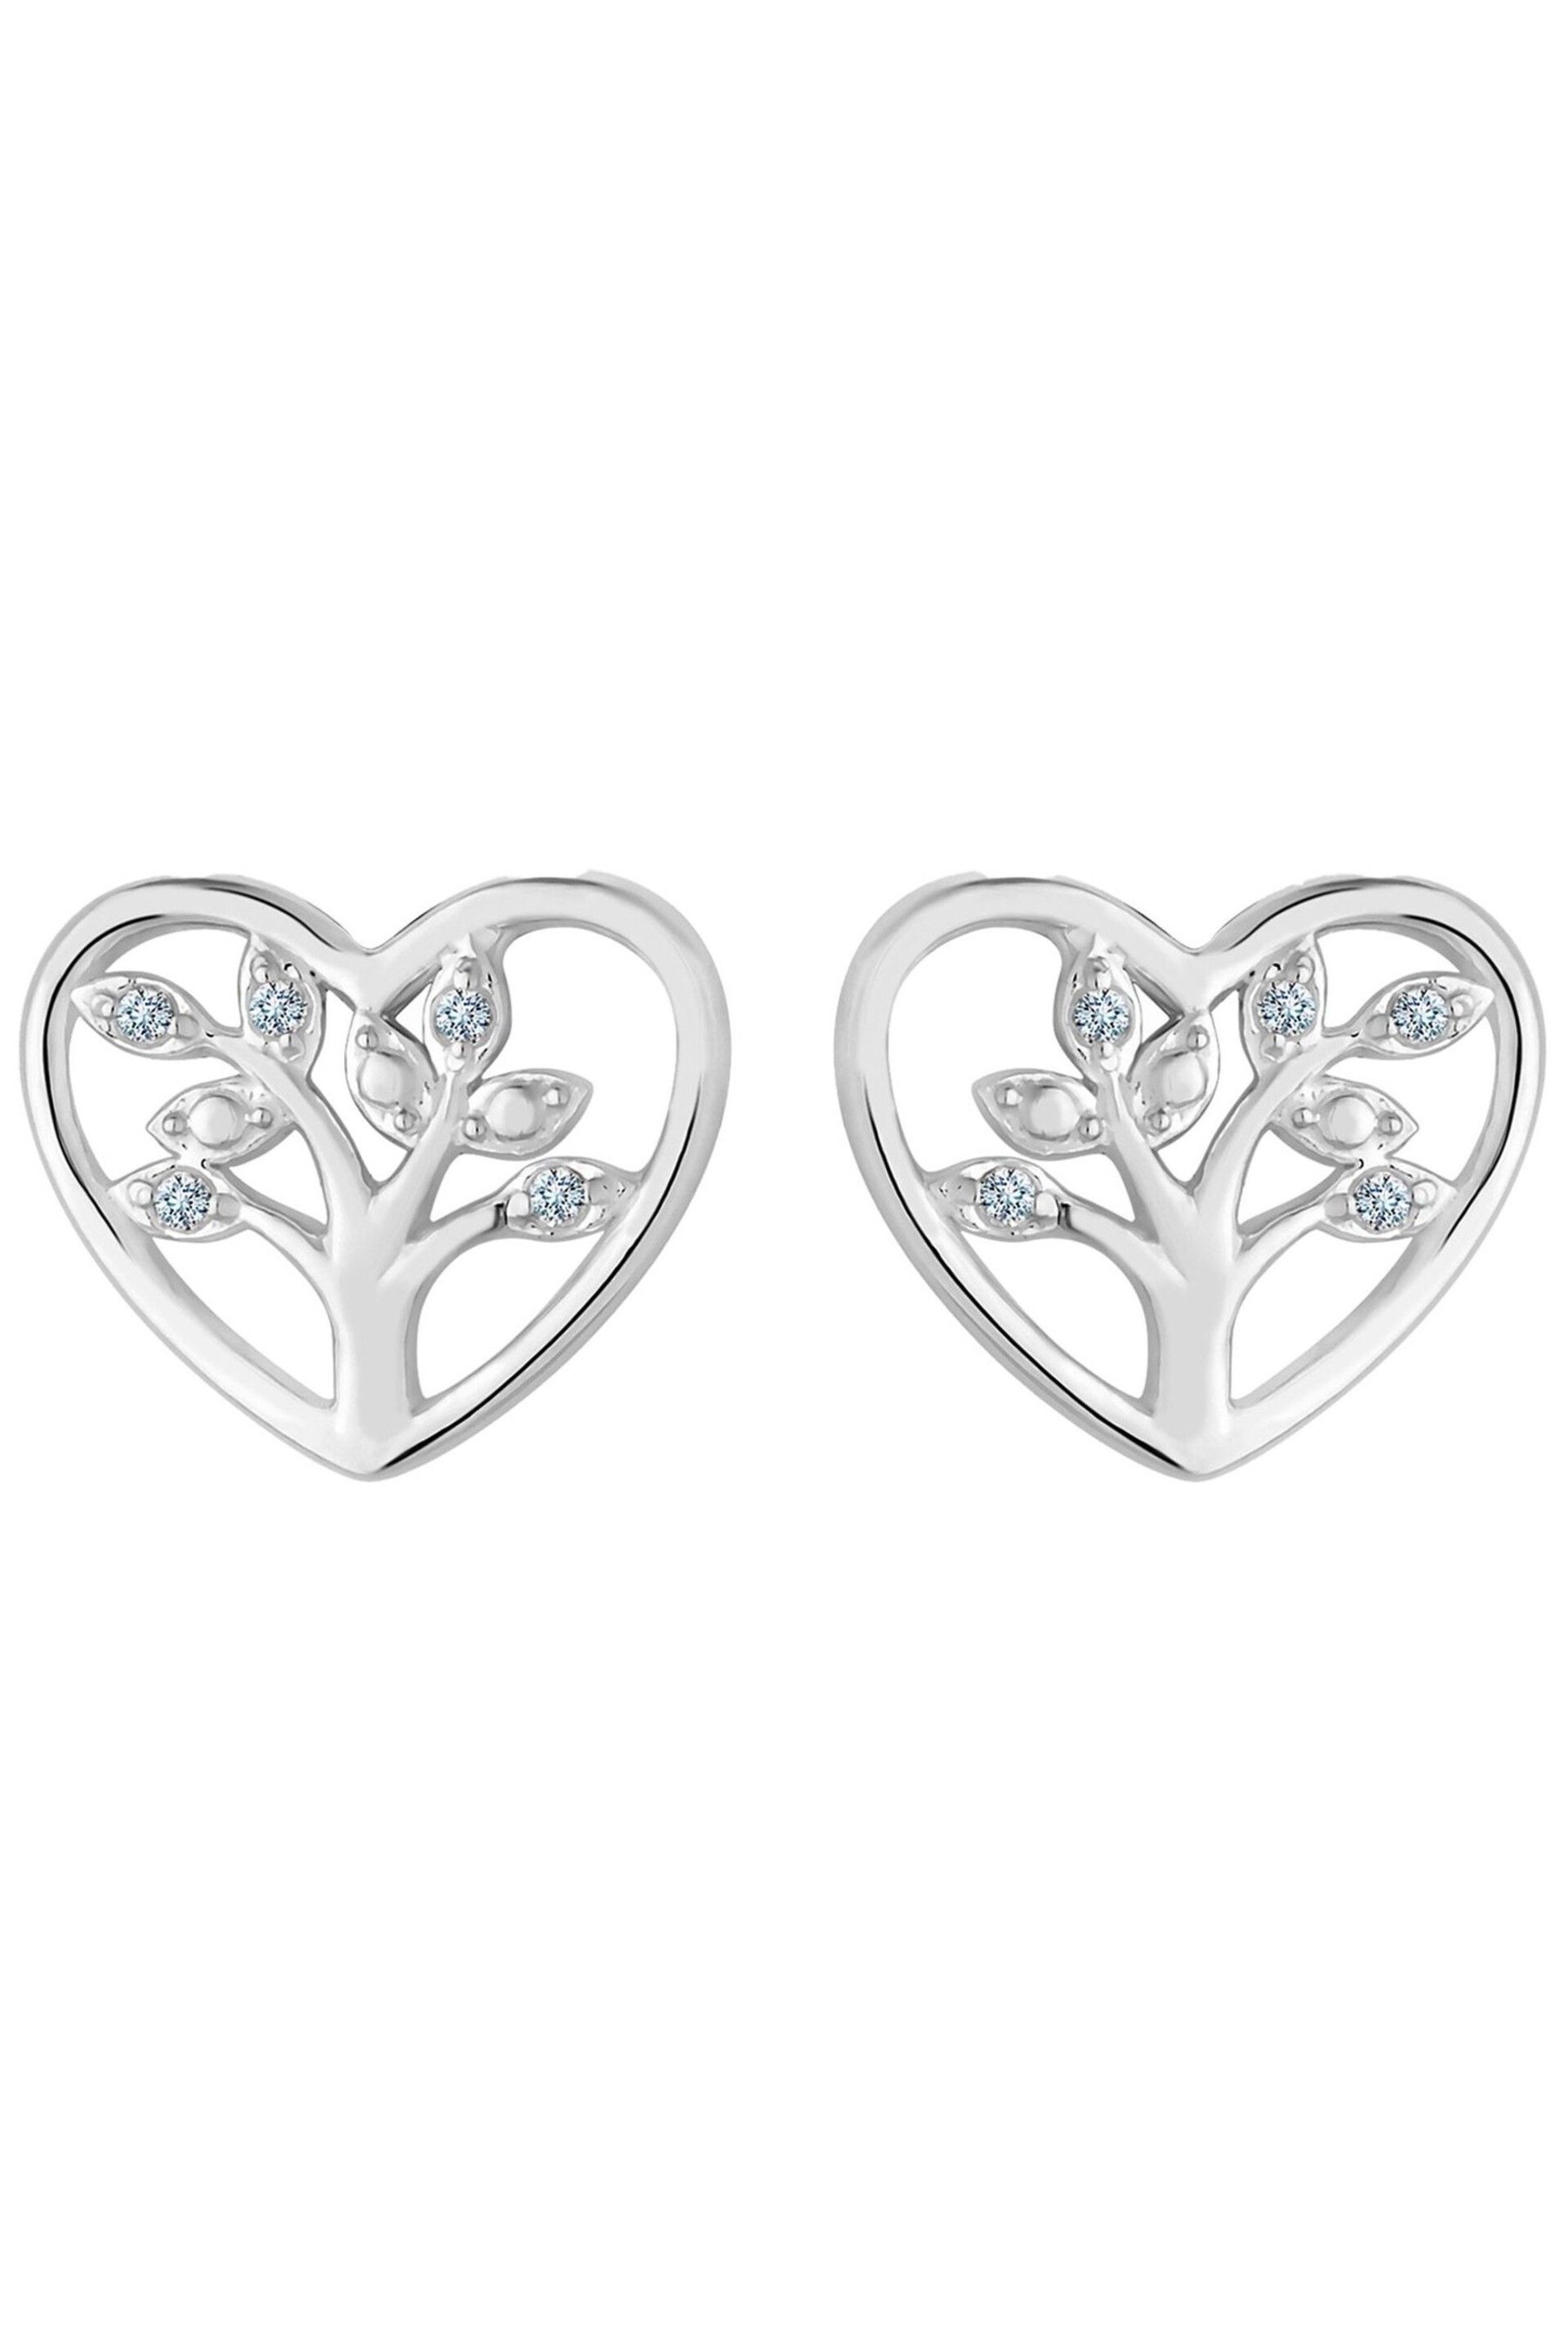 Simply Silver Sterling Silver Tone 925 Tree of Love Heart Stud Earrings - Image 2 of 3